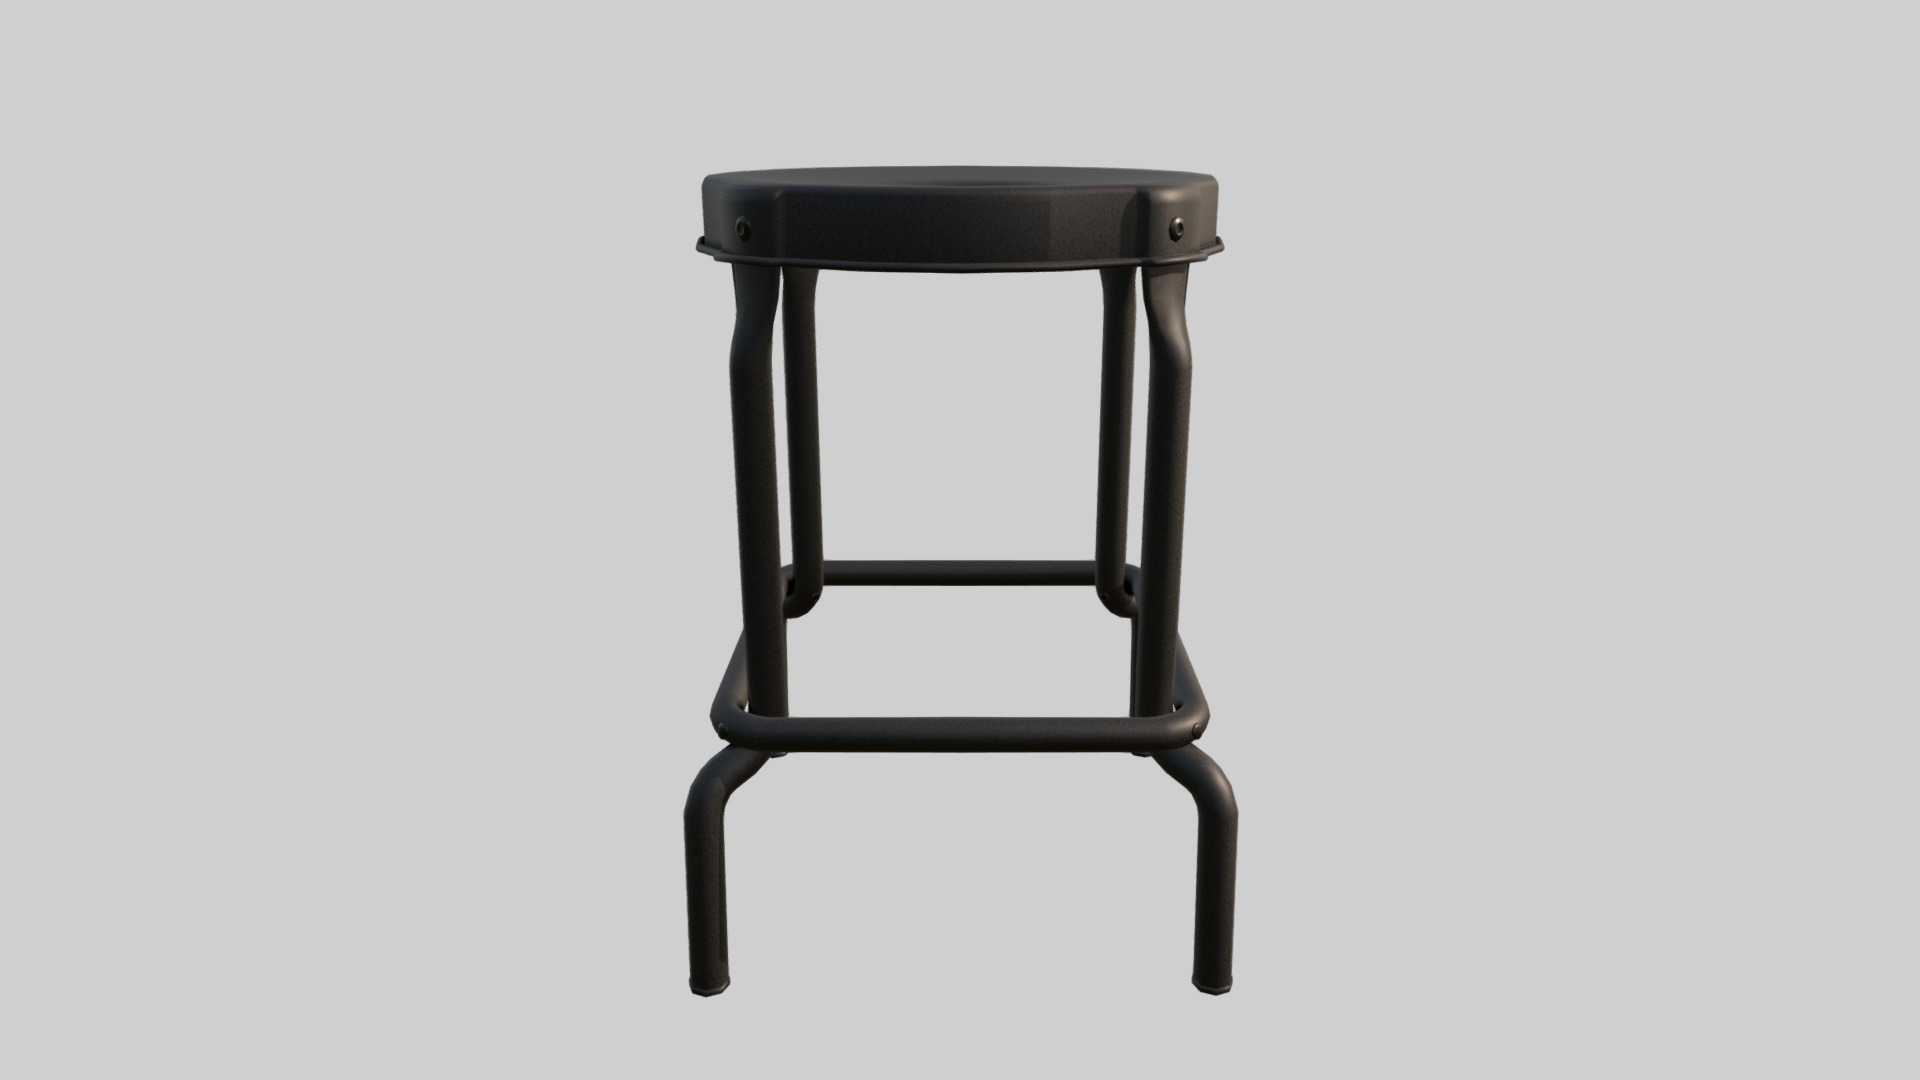 3D model Stool Raskog - This is a 3D model of the Stool Raskog. The 3D model is about a black chair with a cushion.